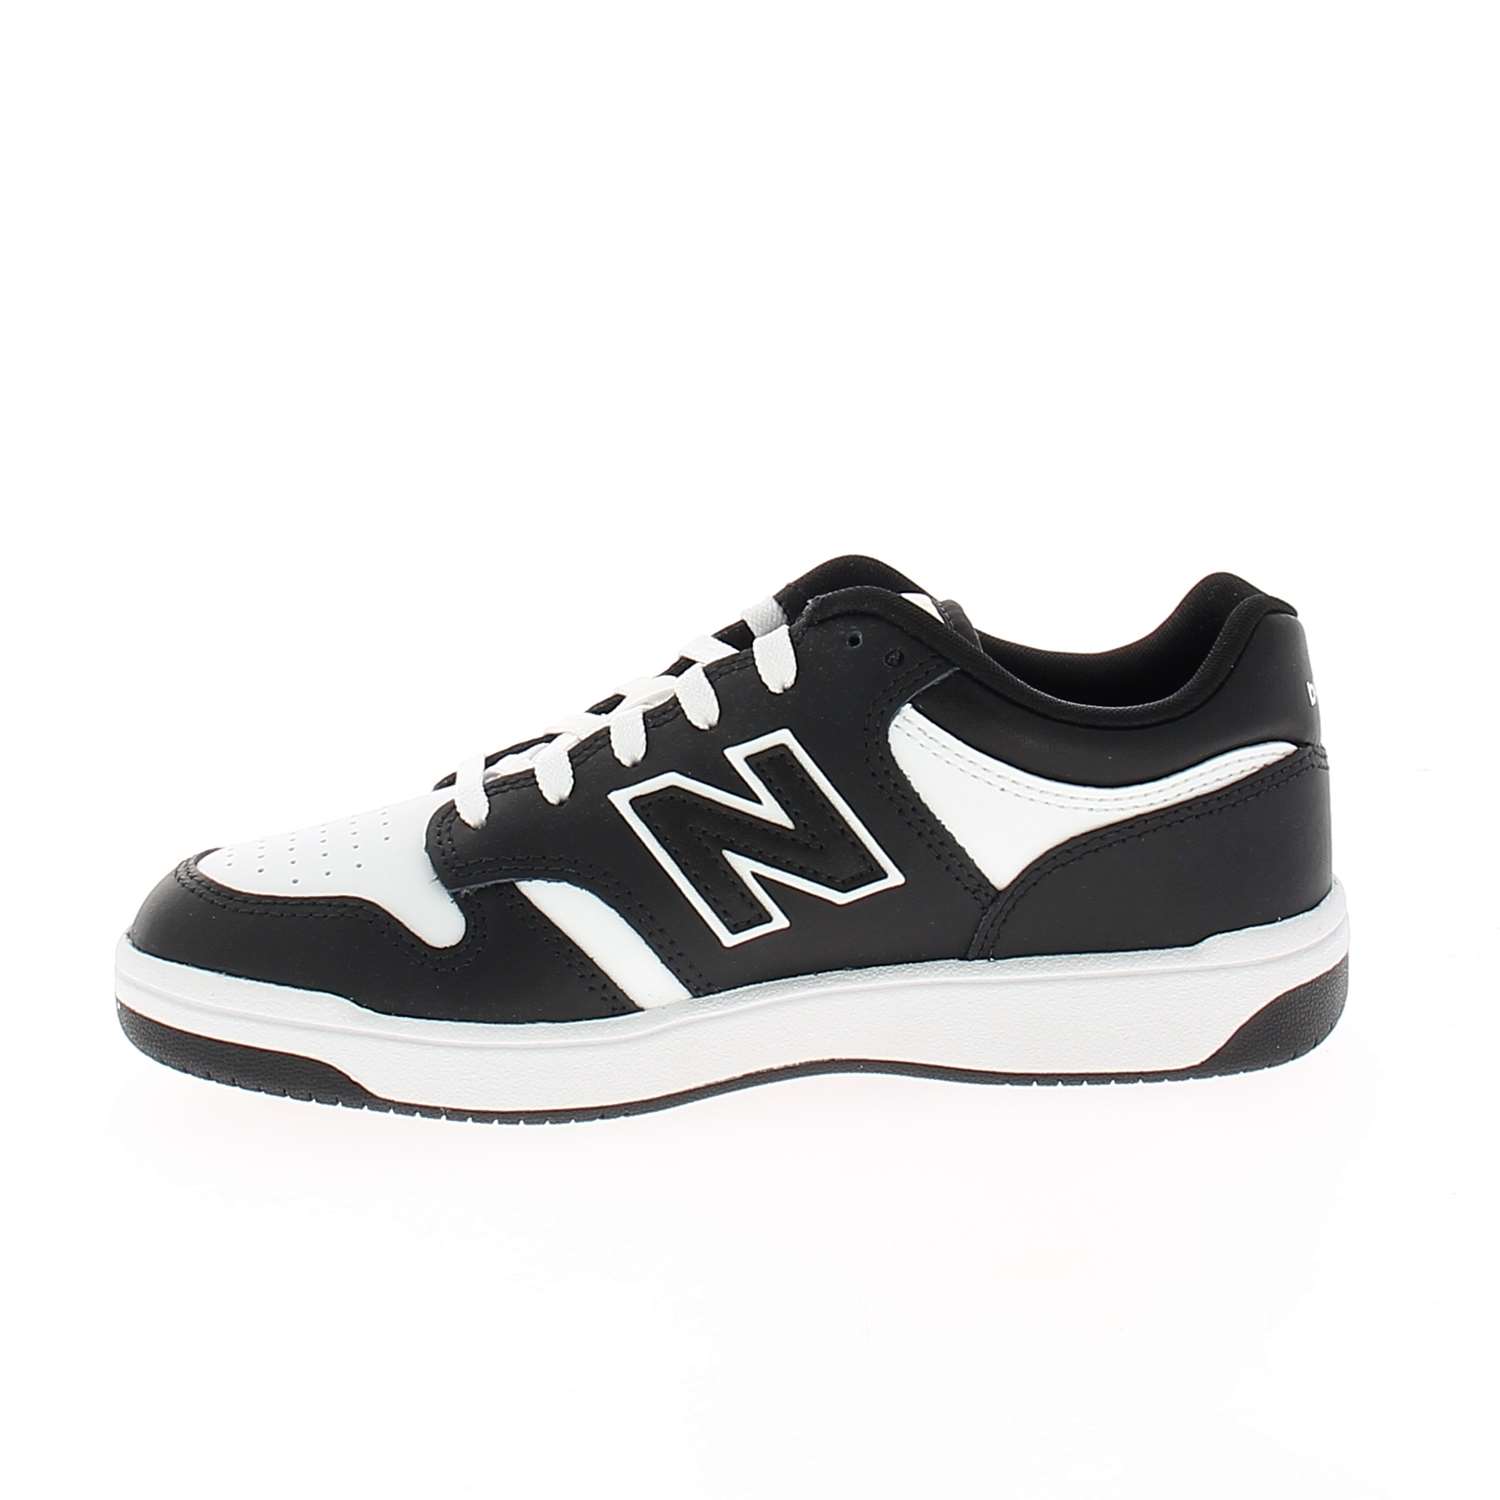 03 - 480 - NEW BALANCE -  - Synthétique